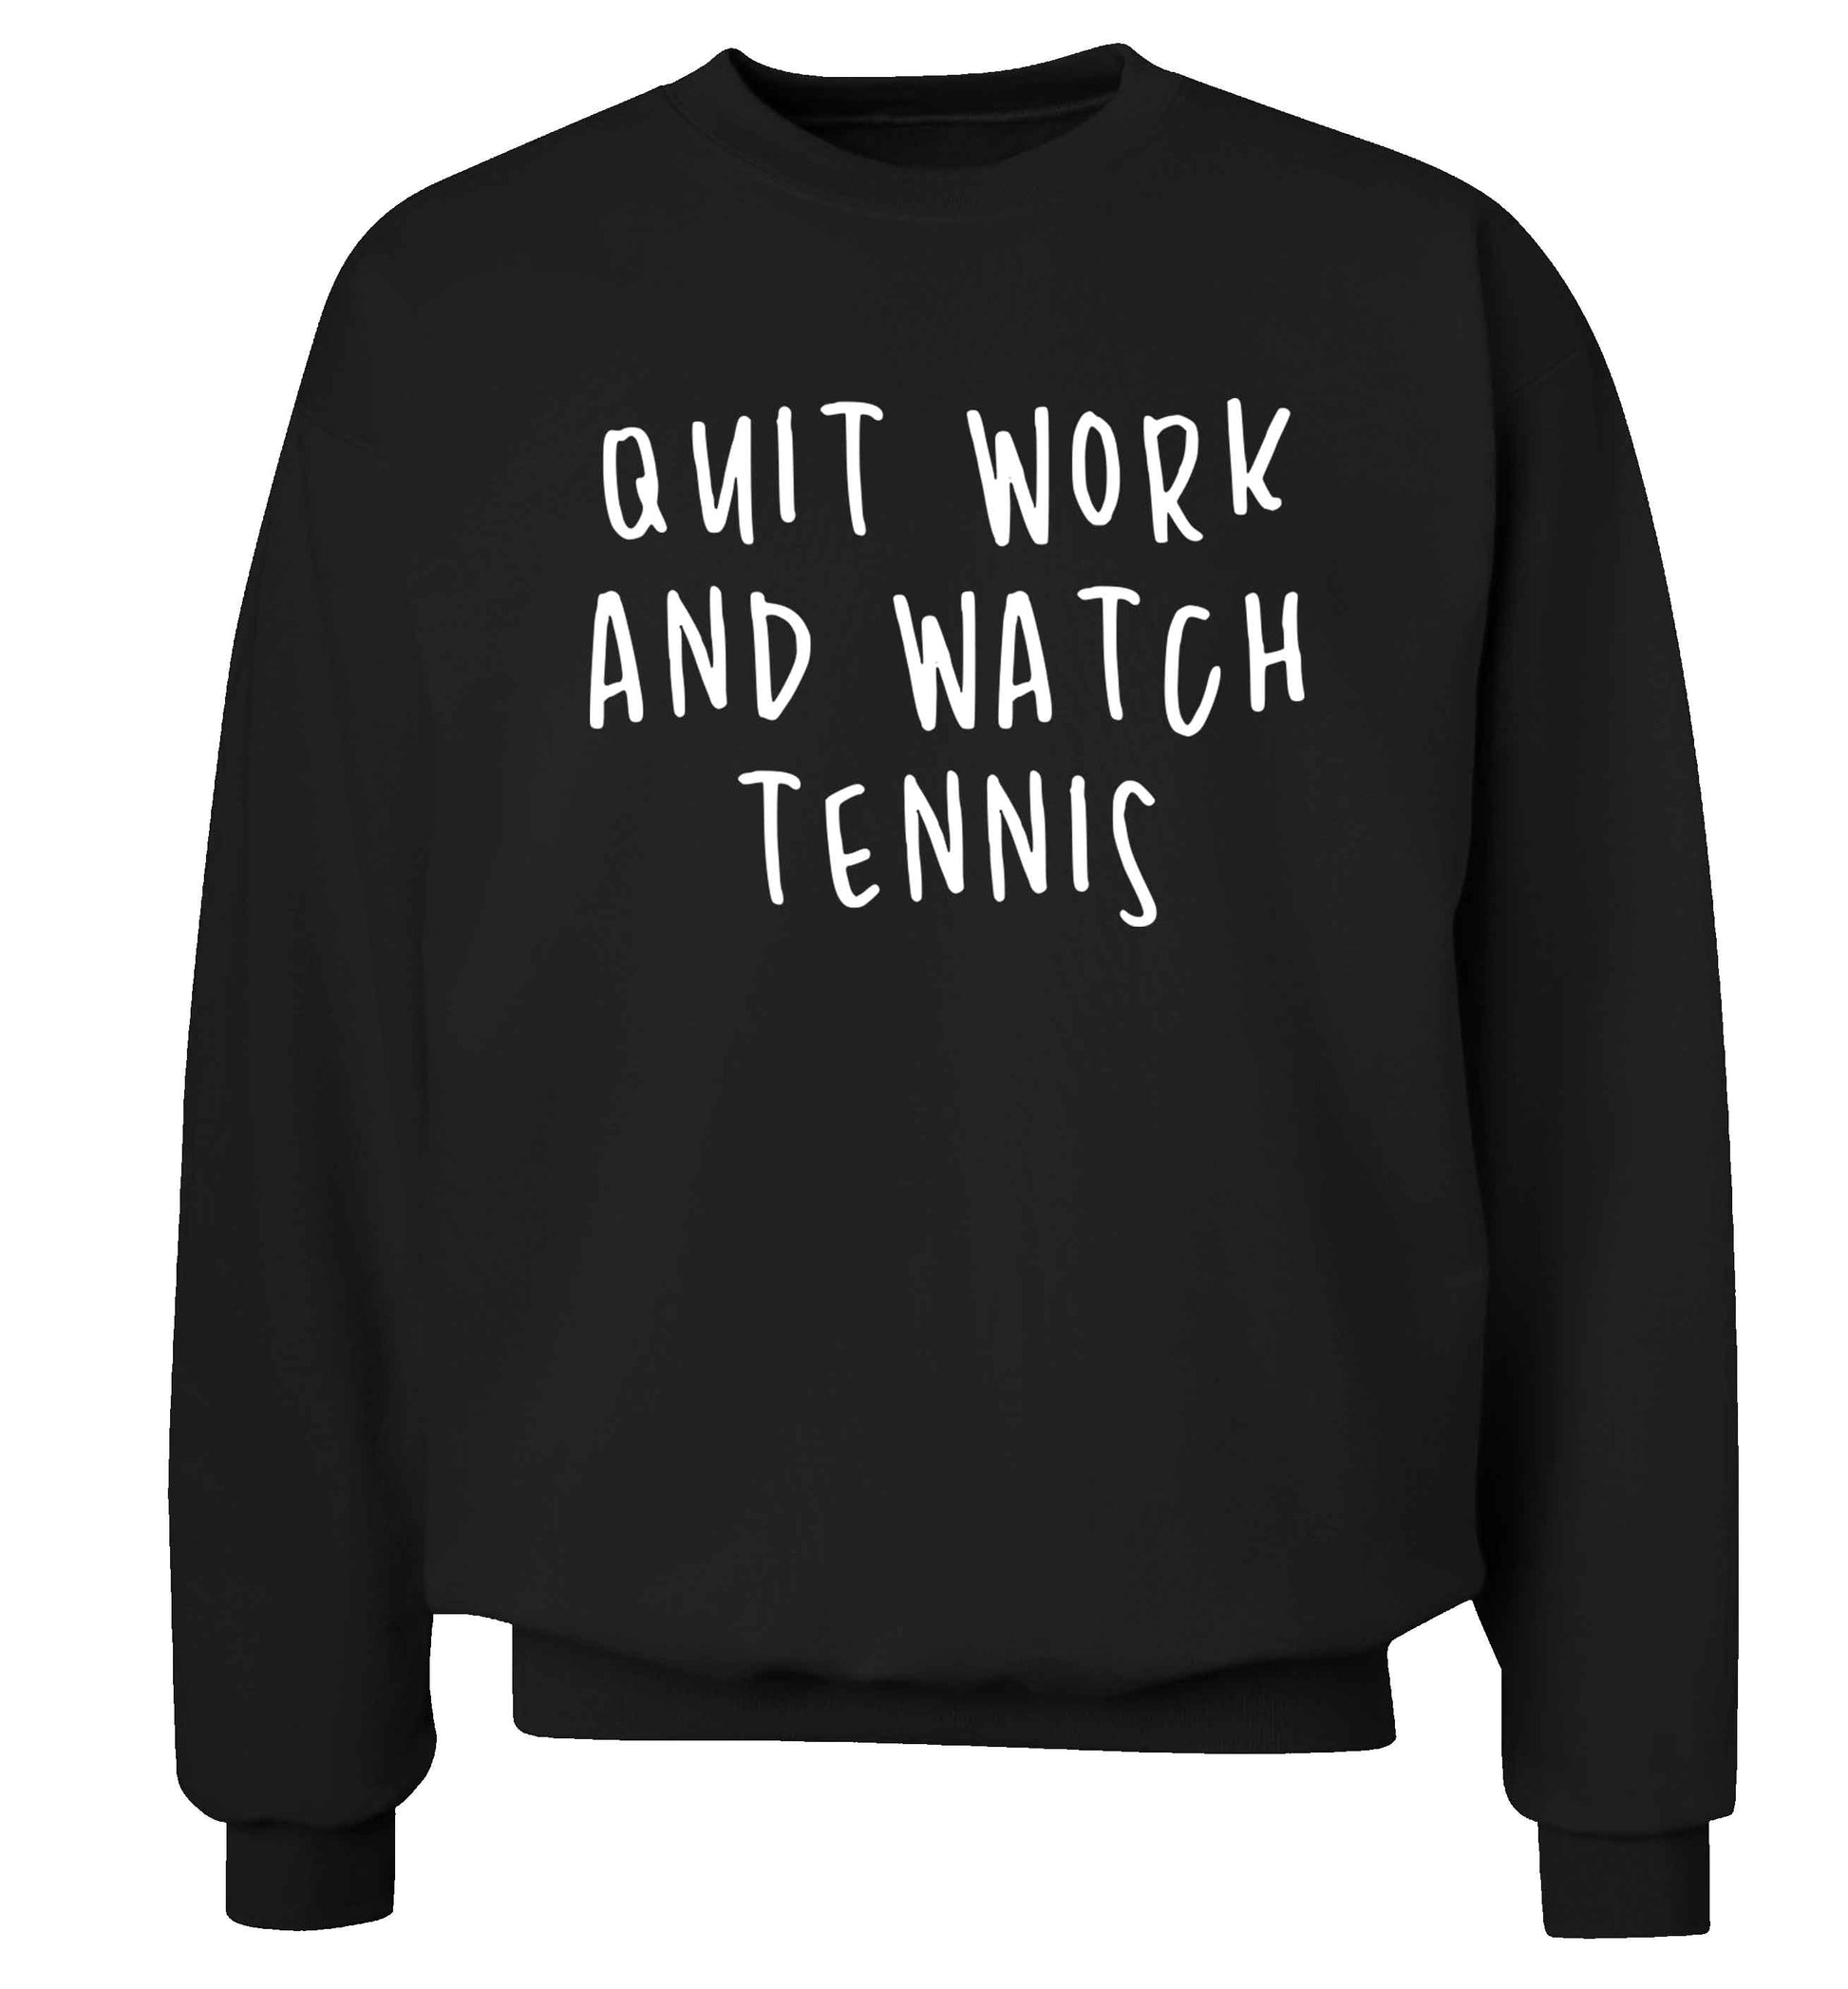 Quit work and watch tennis Adult's unisex black Sweater 2XL